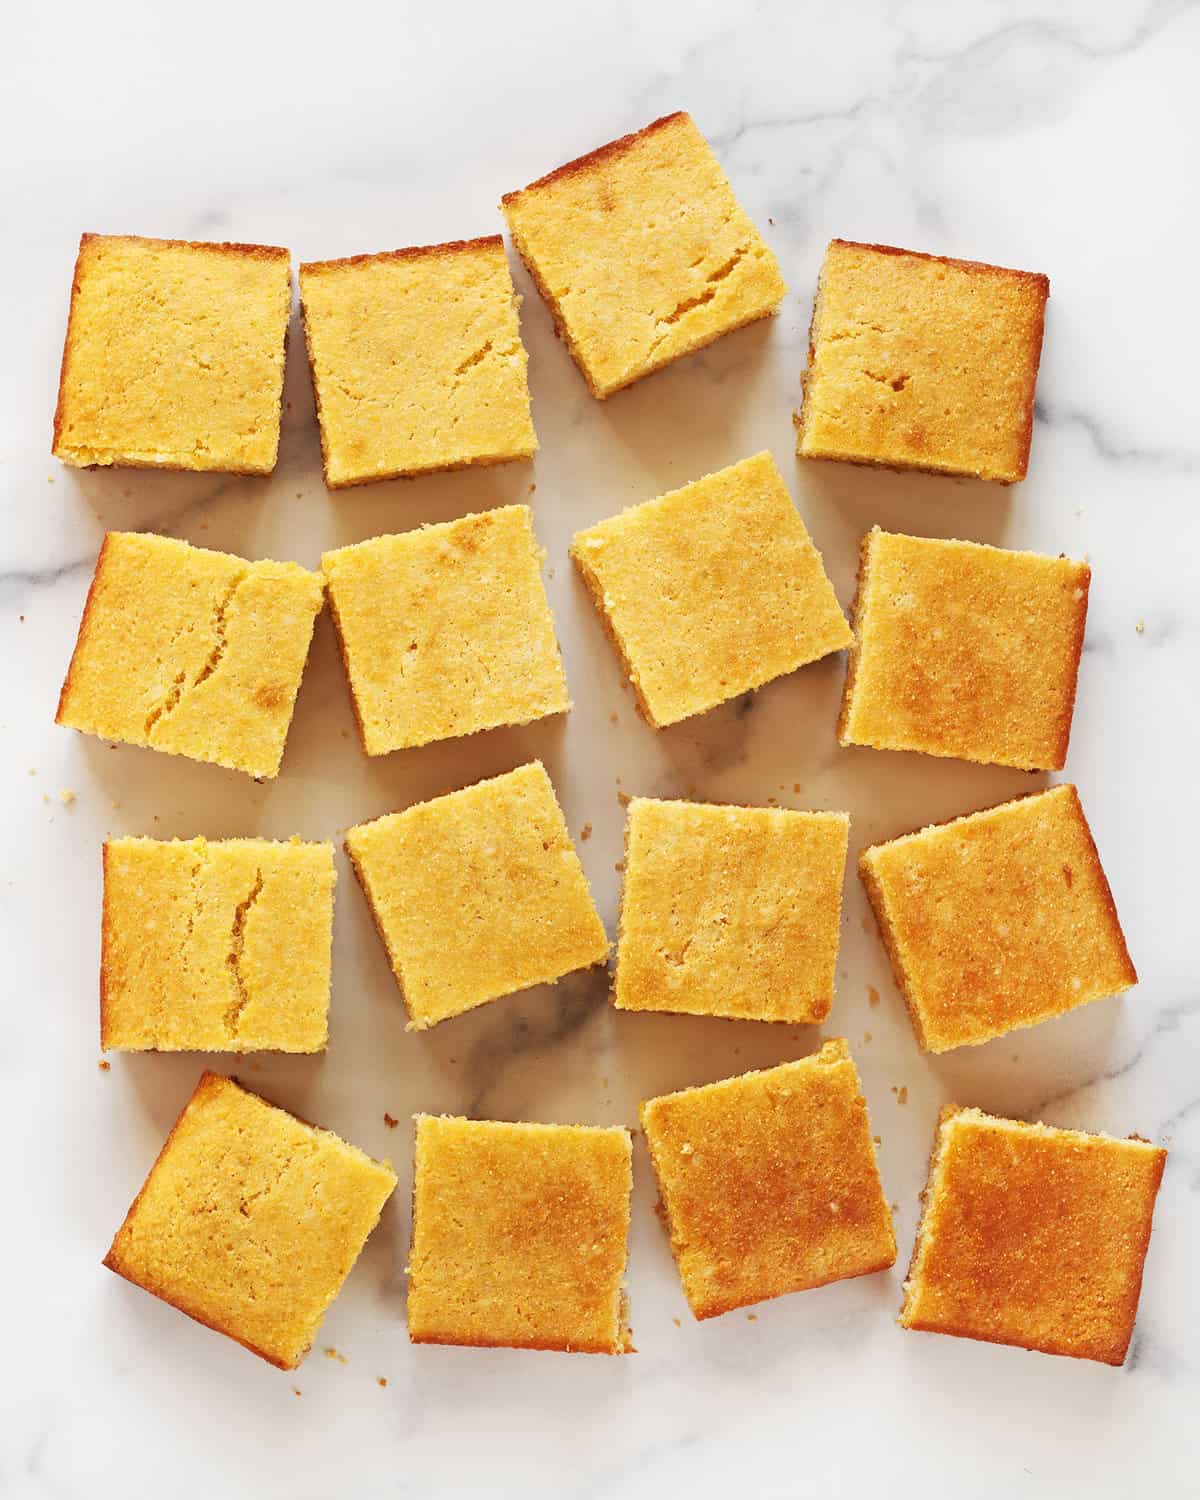 Cornbread cut into squares and arranged in rows.